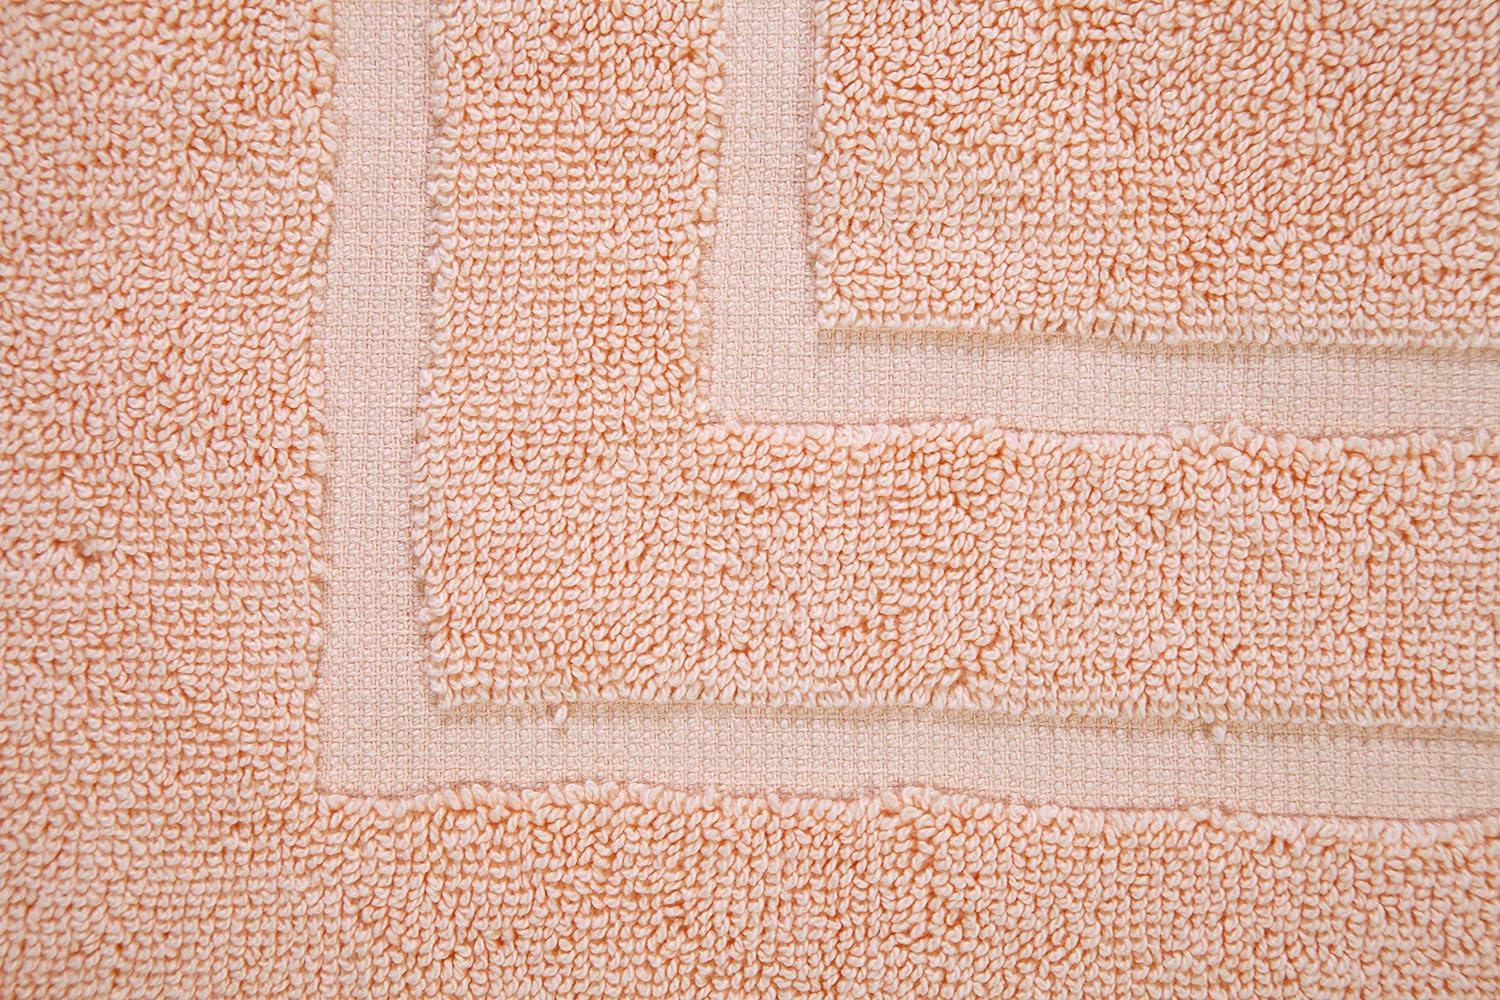 Feather  Stitch 2 Piece Towel Like Bath Mats (30x21 Inch) 100% Cotton Terry Mat, Non-Slip Hotel, Spa, Shower Floor Mats [NOT A Bathroom Rug], Soft Absorbent Washable Mats- Pale Peach